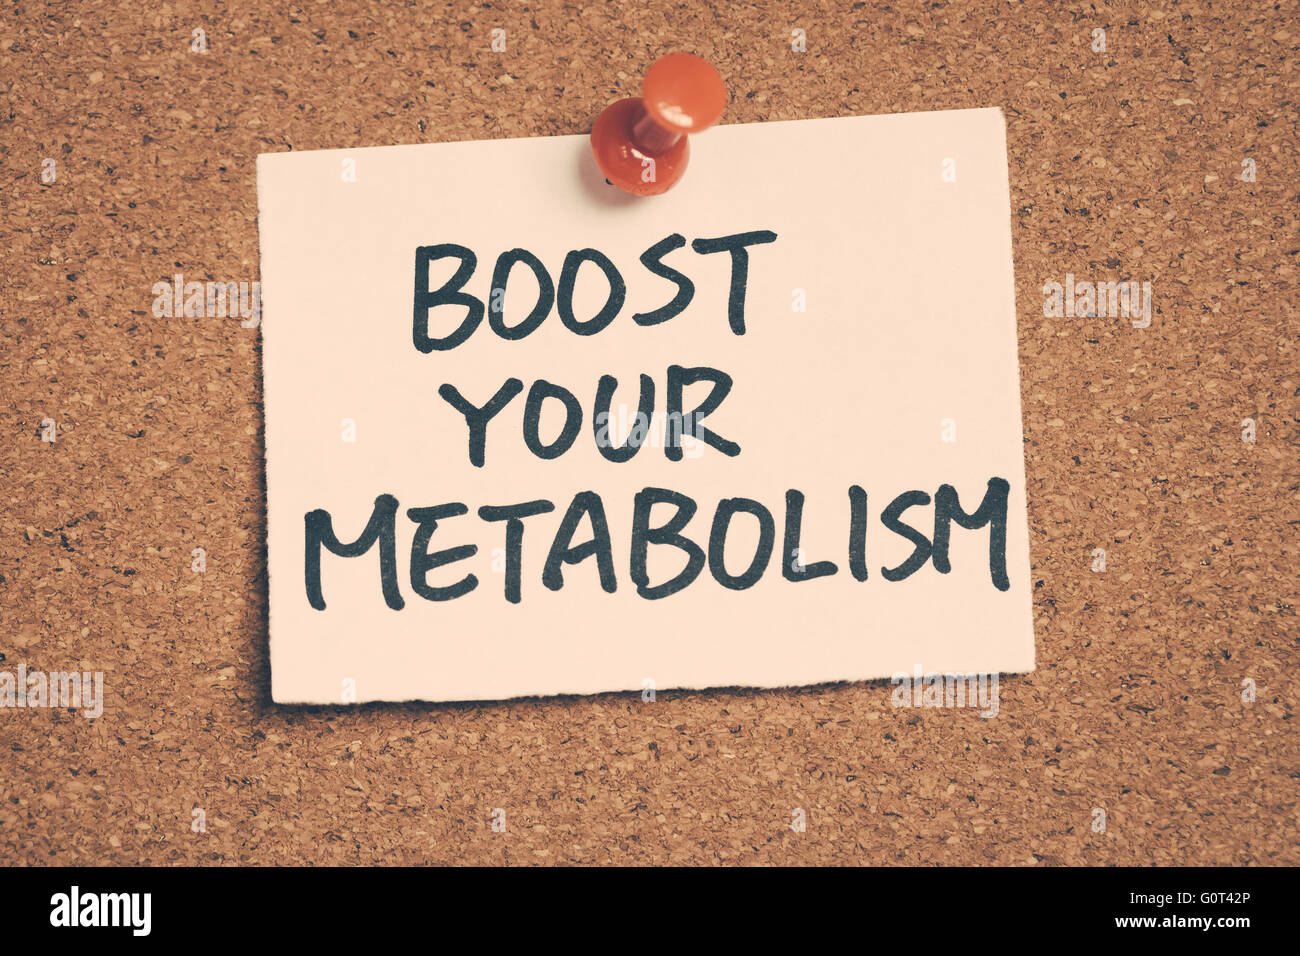 boost your metabolism Stock Photo